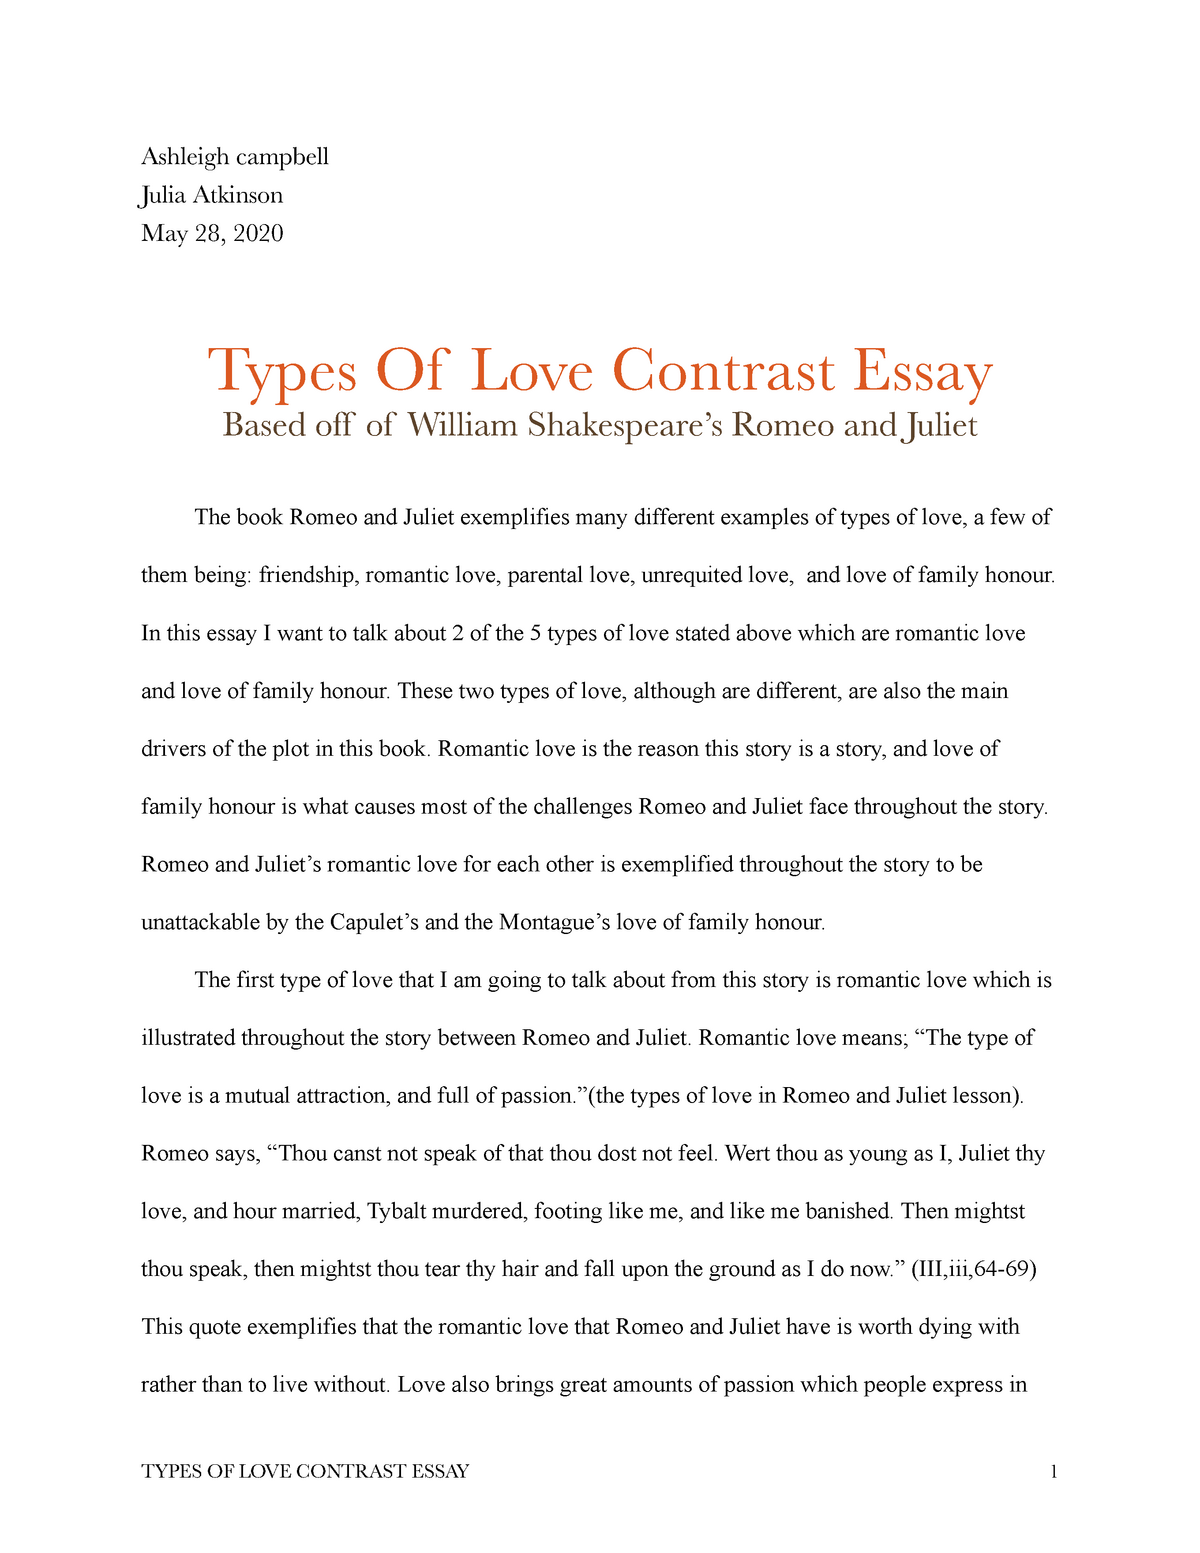 types of love in romeo and juliet essay